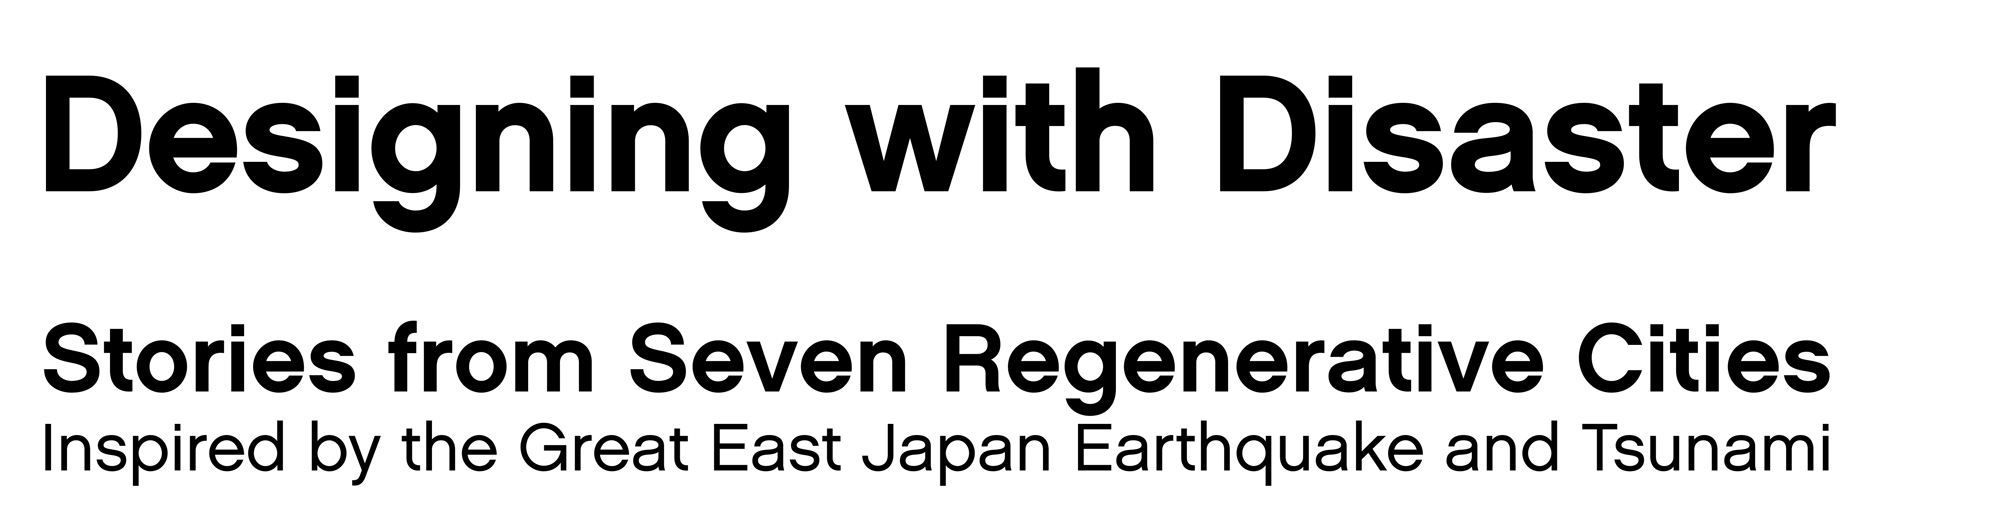 Designing with Disaster | Stories from Seven Regenerative Cities exhibition logo